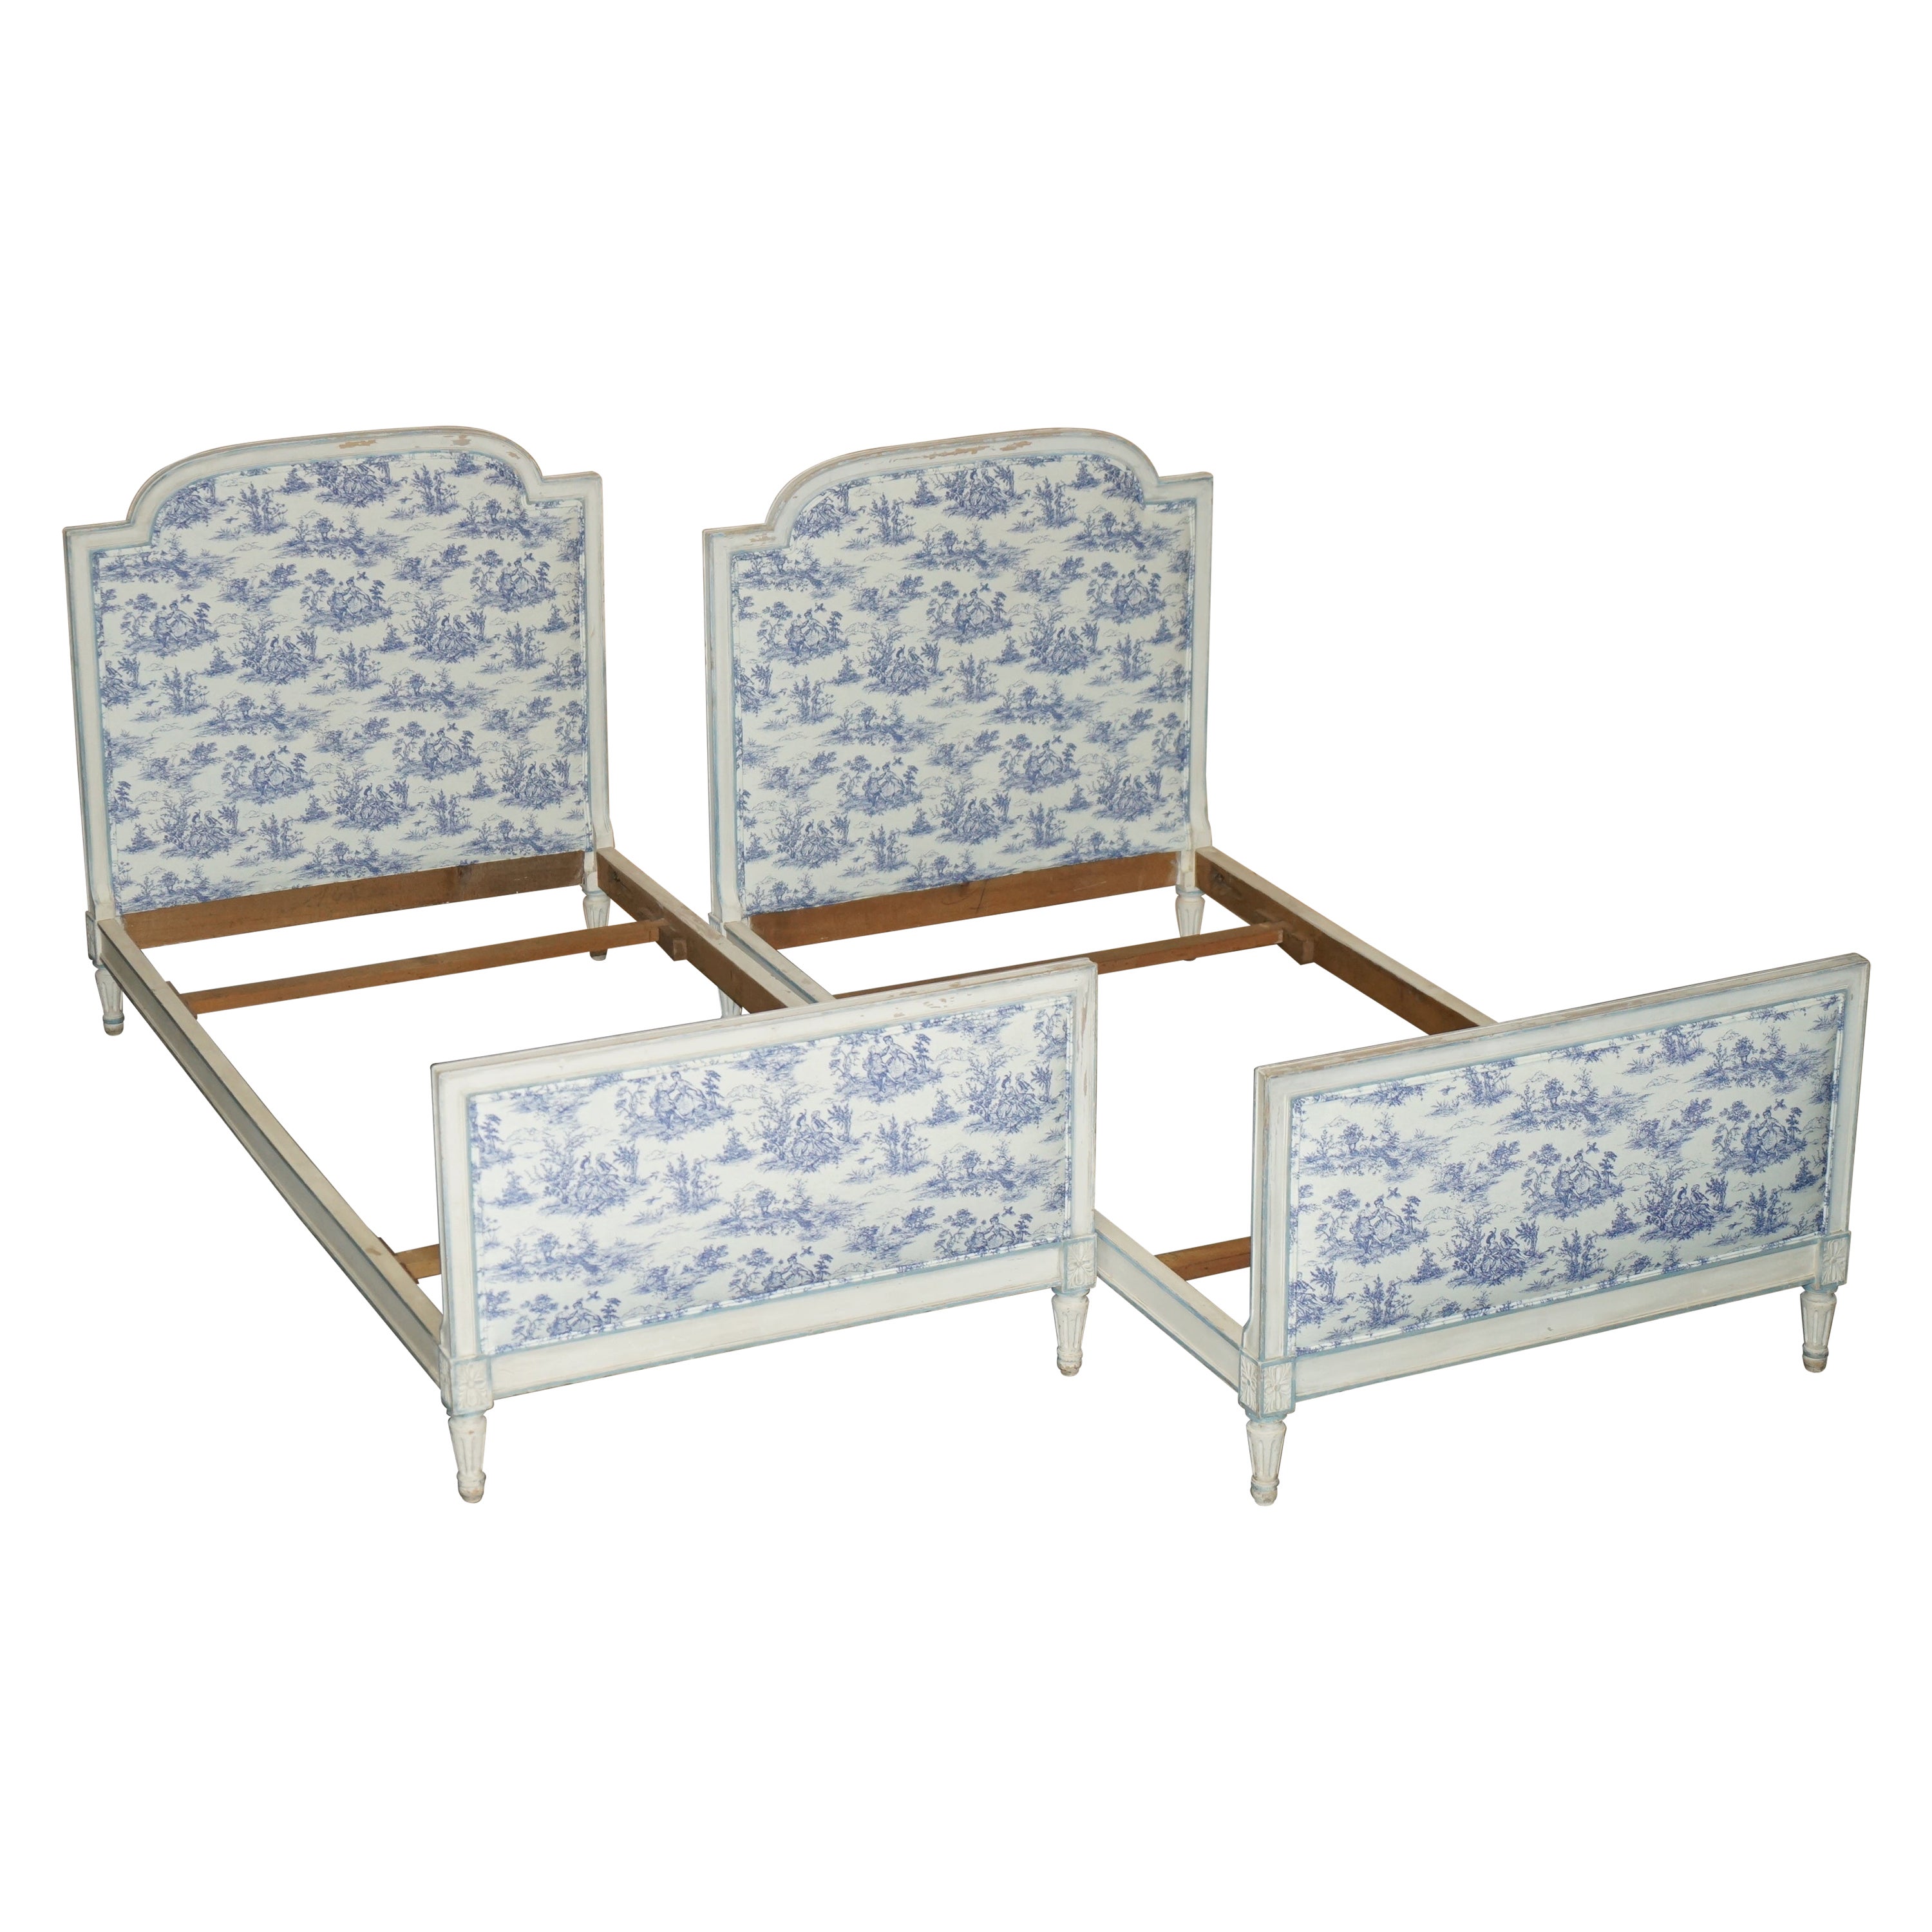 PAIR OF ANTIQUE FRENCH SiNGLE BEDSTEAD FRAMES MIT TOILE DE JOUY UPHOLSTERY